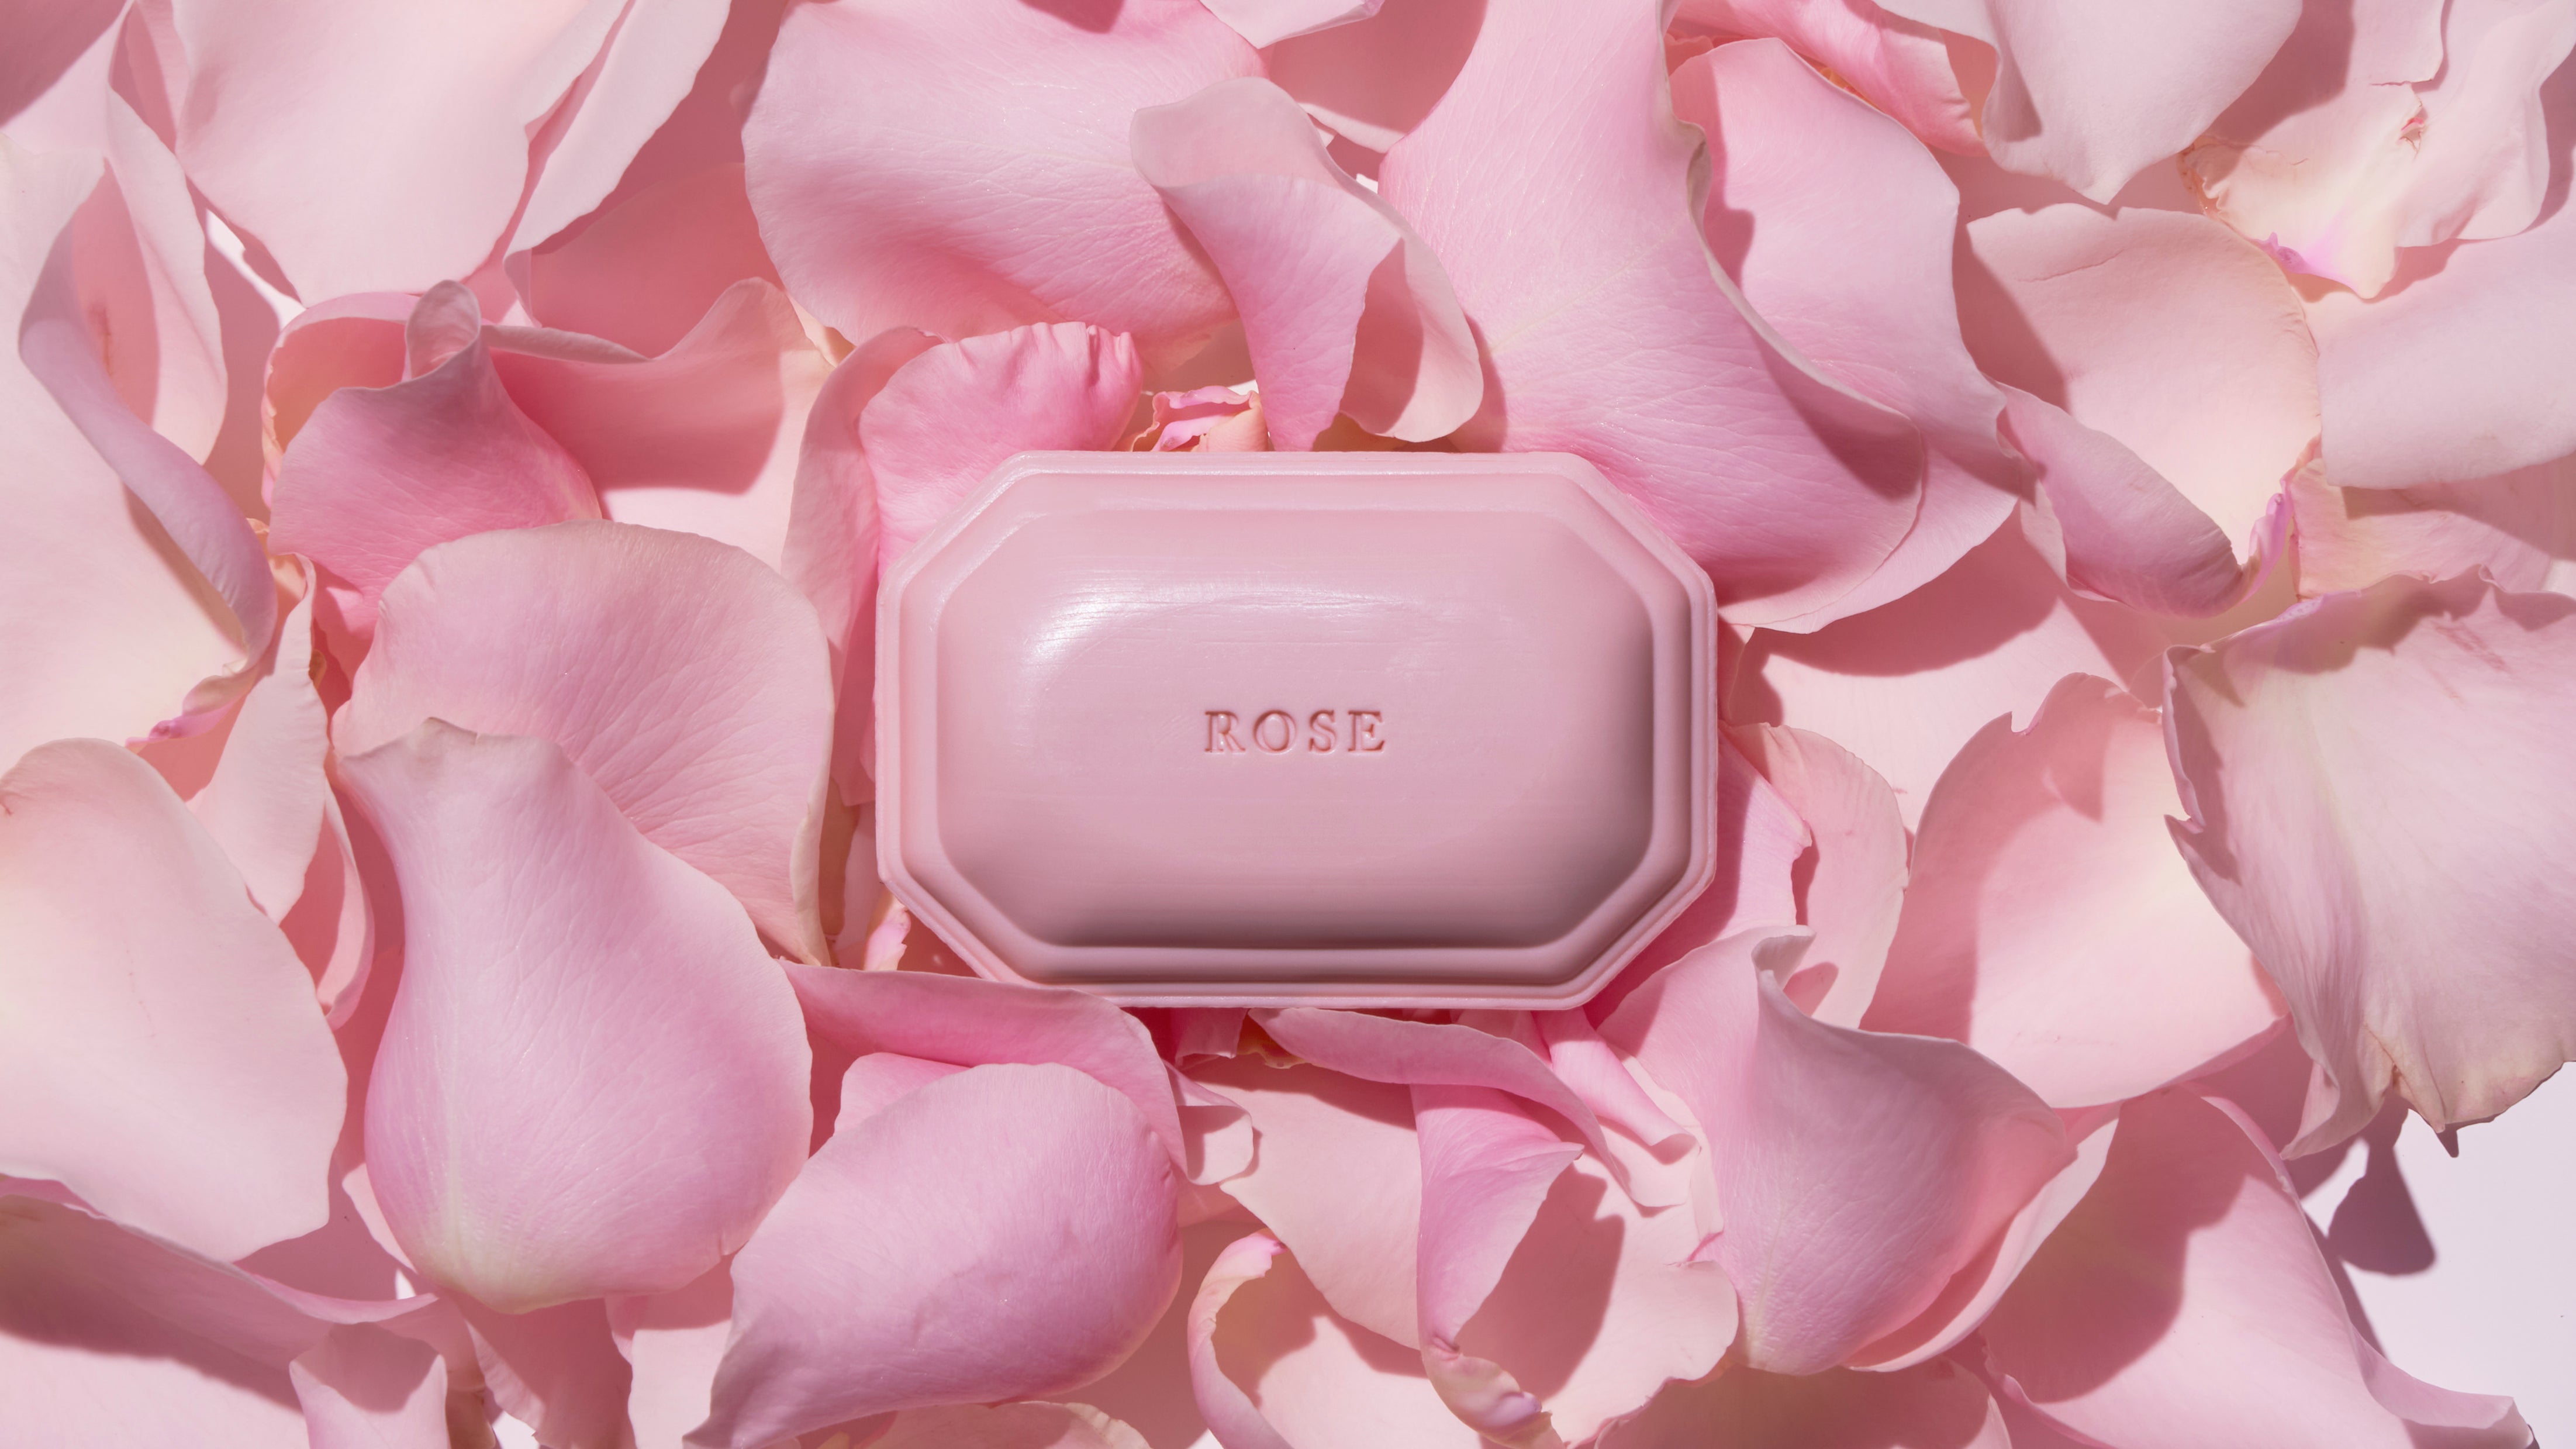 Caswell-Massey Rose Bar Soap: pastel pink soap in art deco form shown with soft pink rose petals